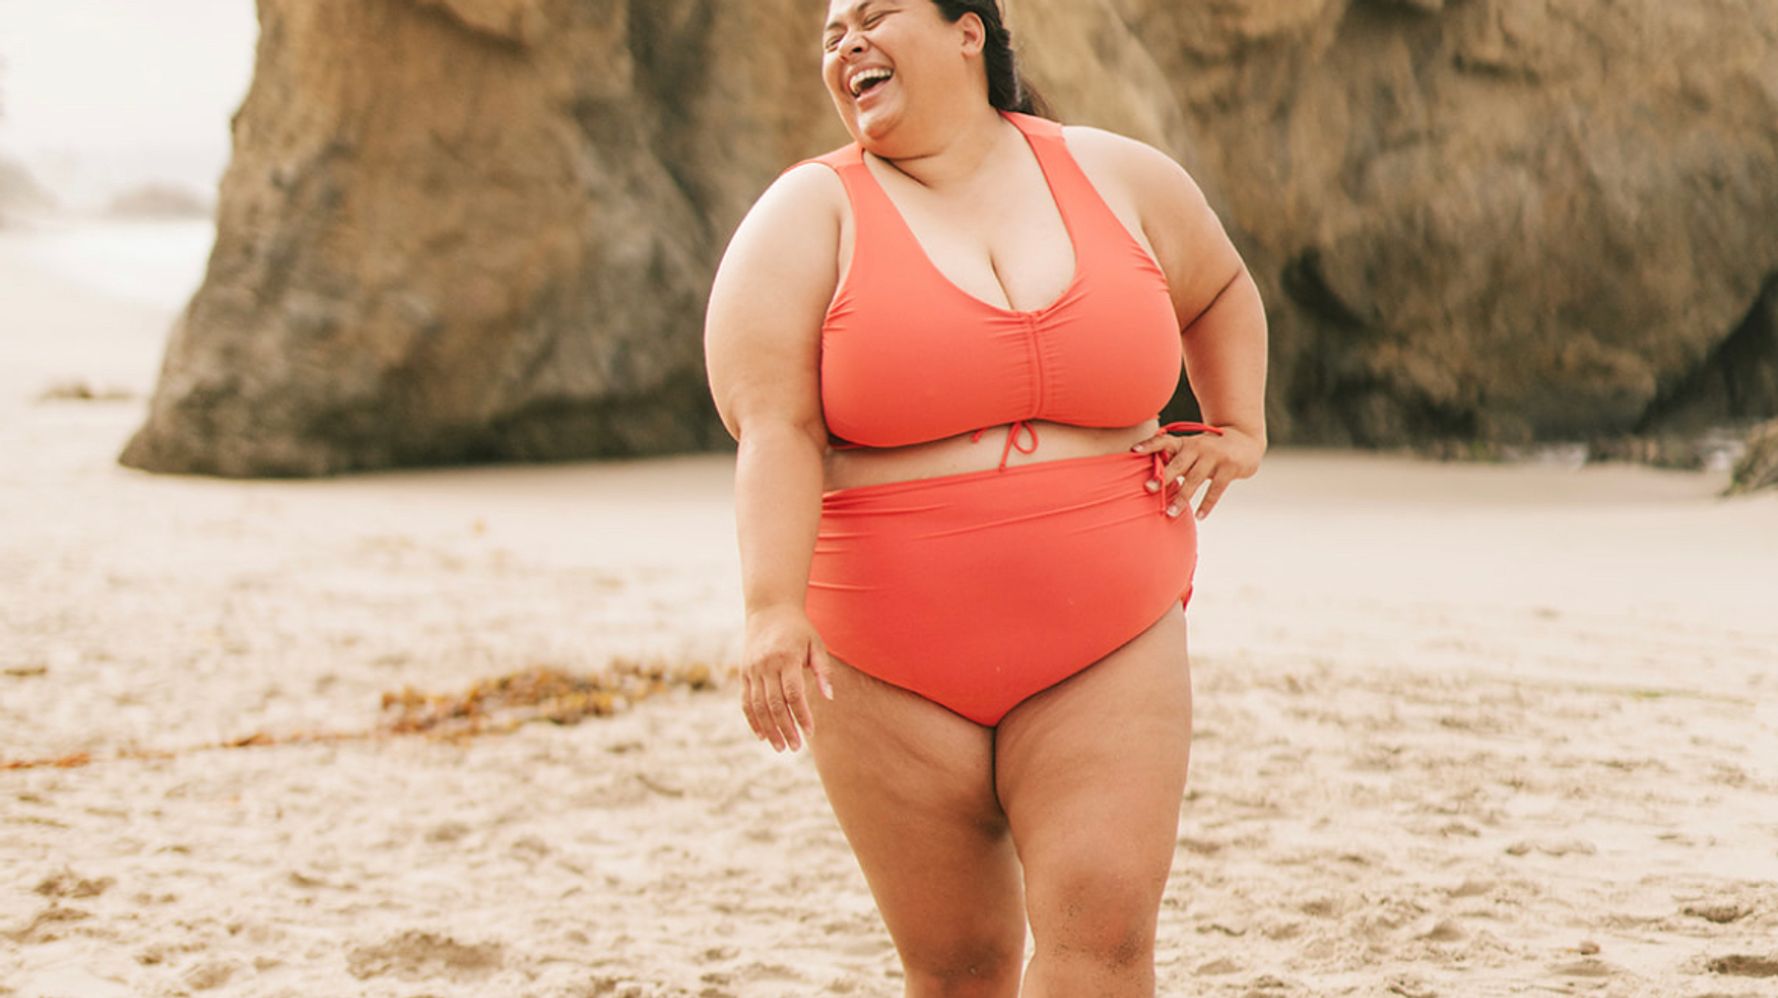 Big Black Nude Beach - I Became A Bikini And Lingerie Model When I Was At My Highest Weight Ever |  HuffPost HuffPost Personal